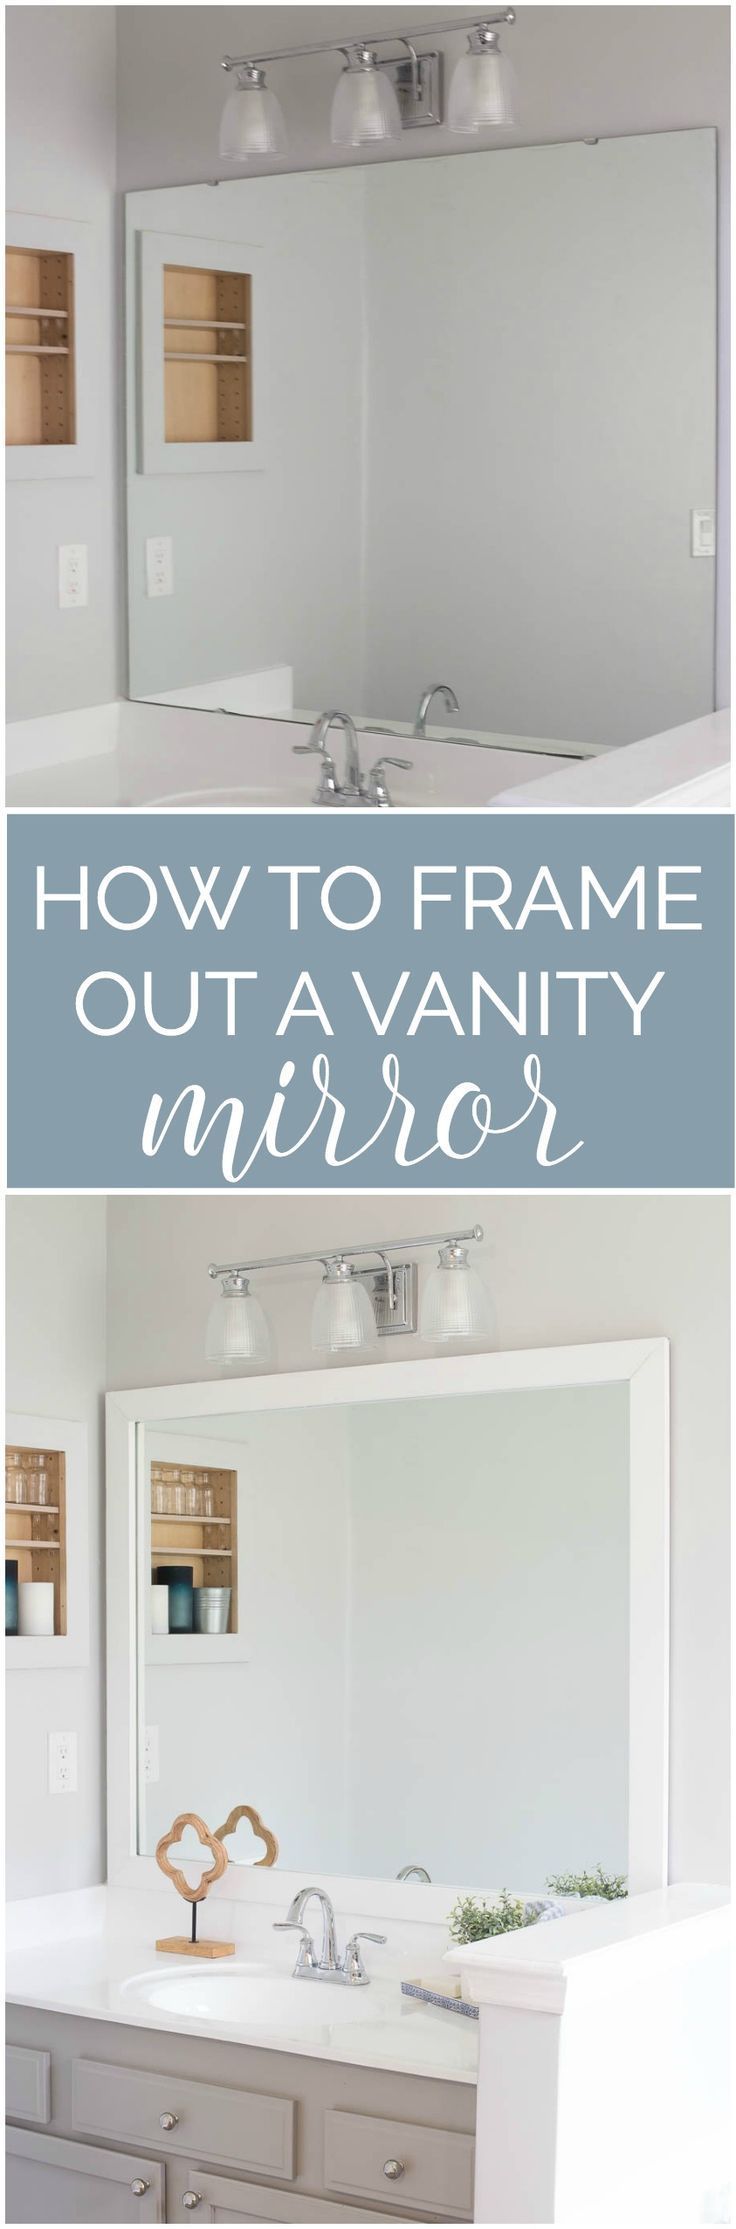 How to frame out your vanity mirror. $40 for a custom looking bathroom mirror.